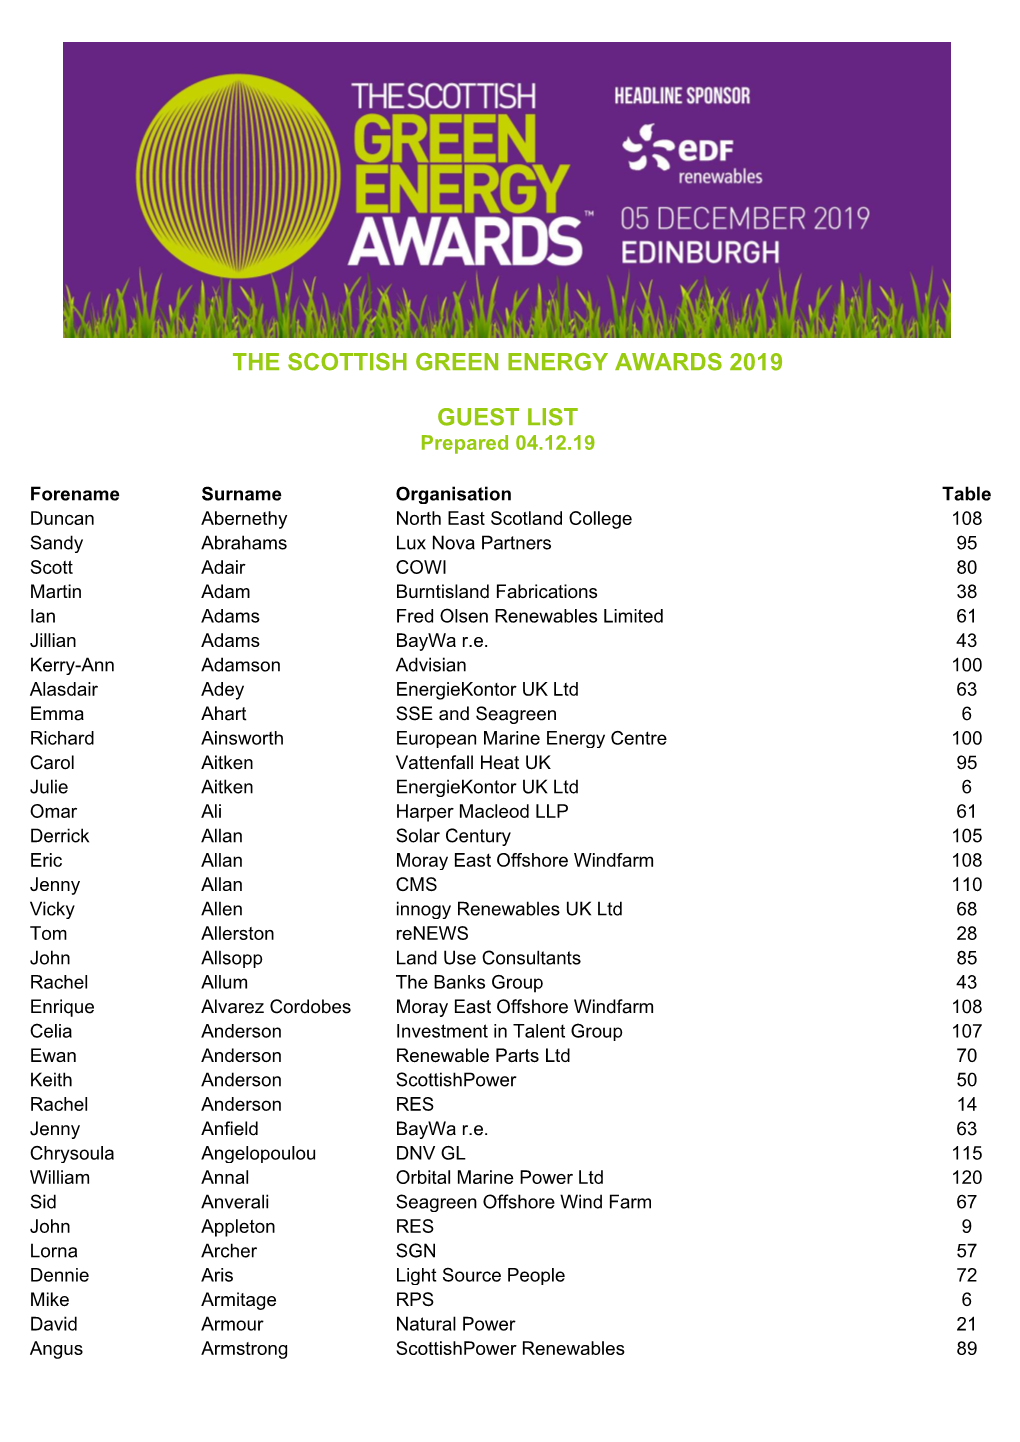 The Scottish Green Energy Awards 2019 Guest List